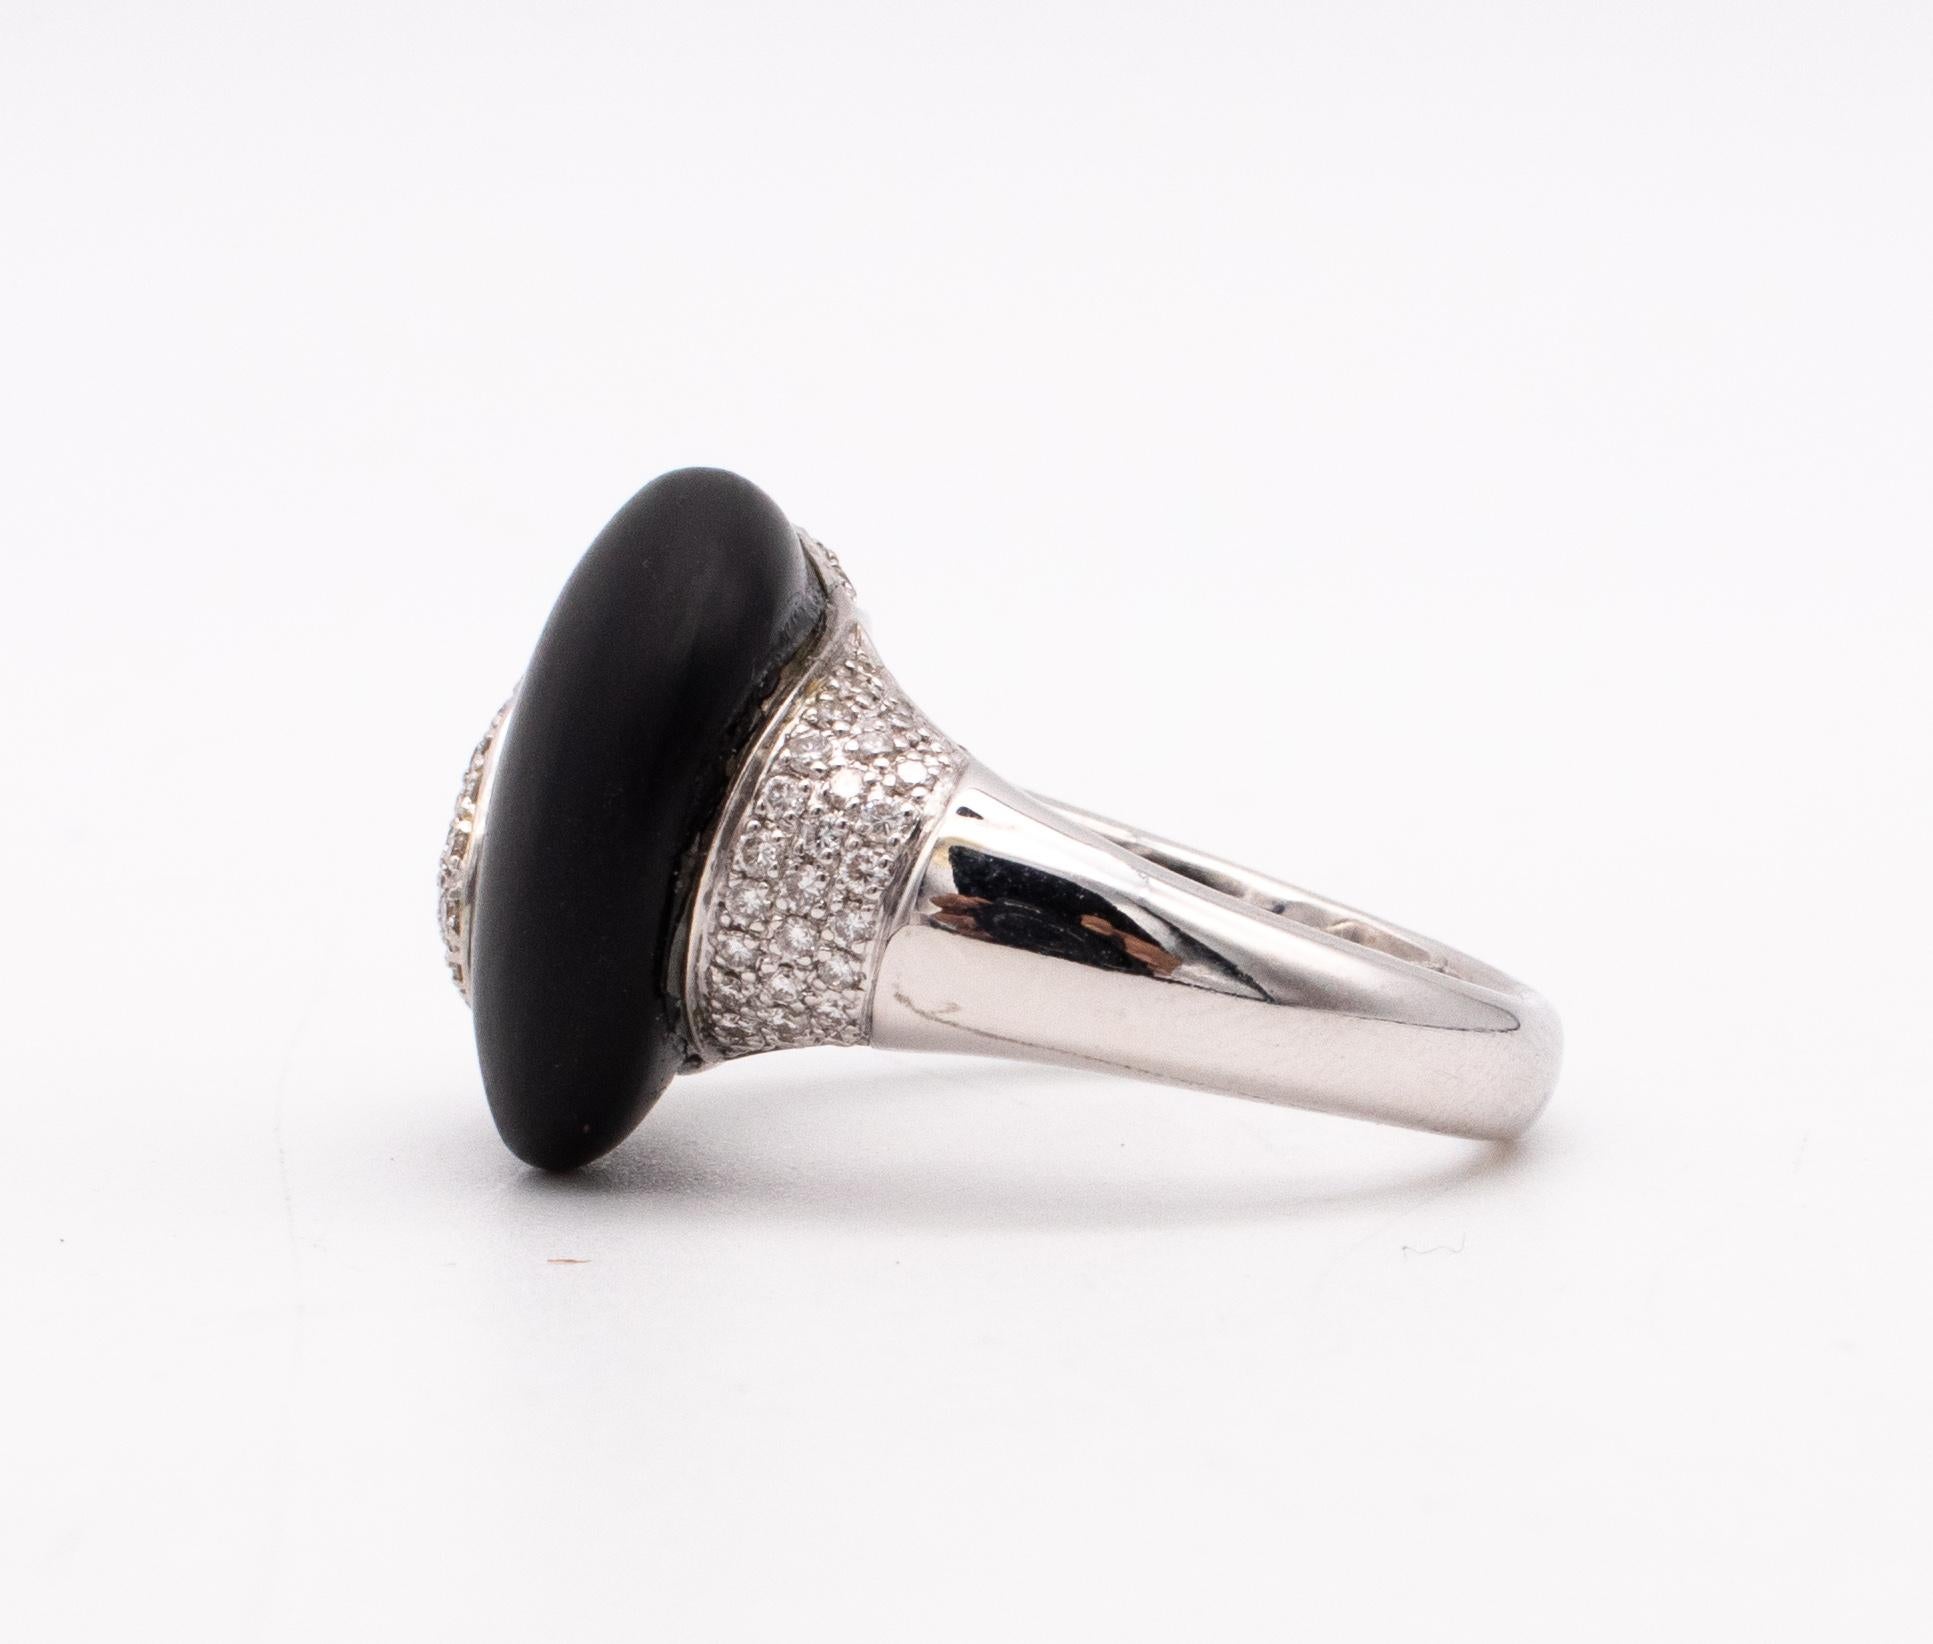 Women's or Men's Meister of Zurich 18kt White Gold Ring with VS Diamonds and Frosted Black Onyx